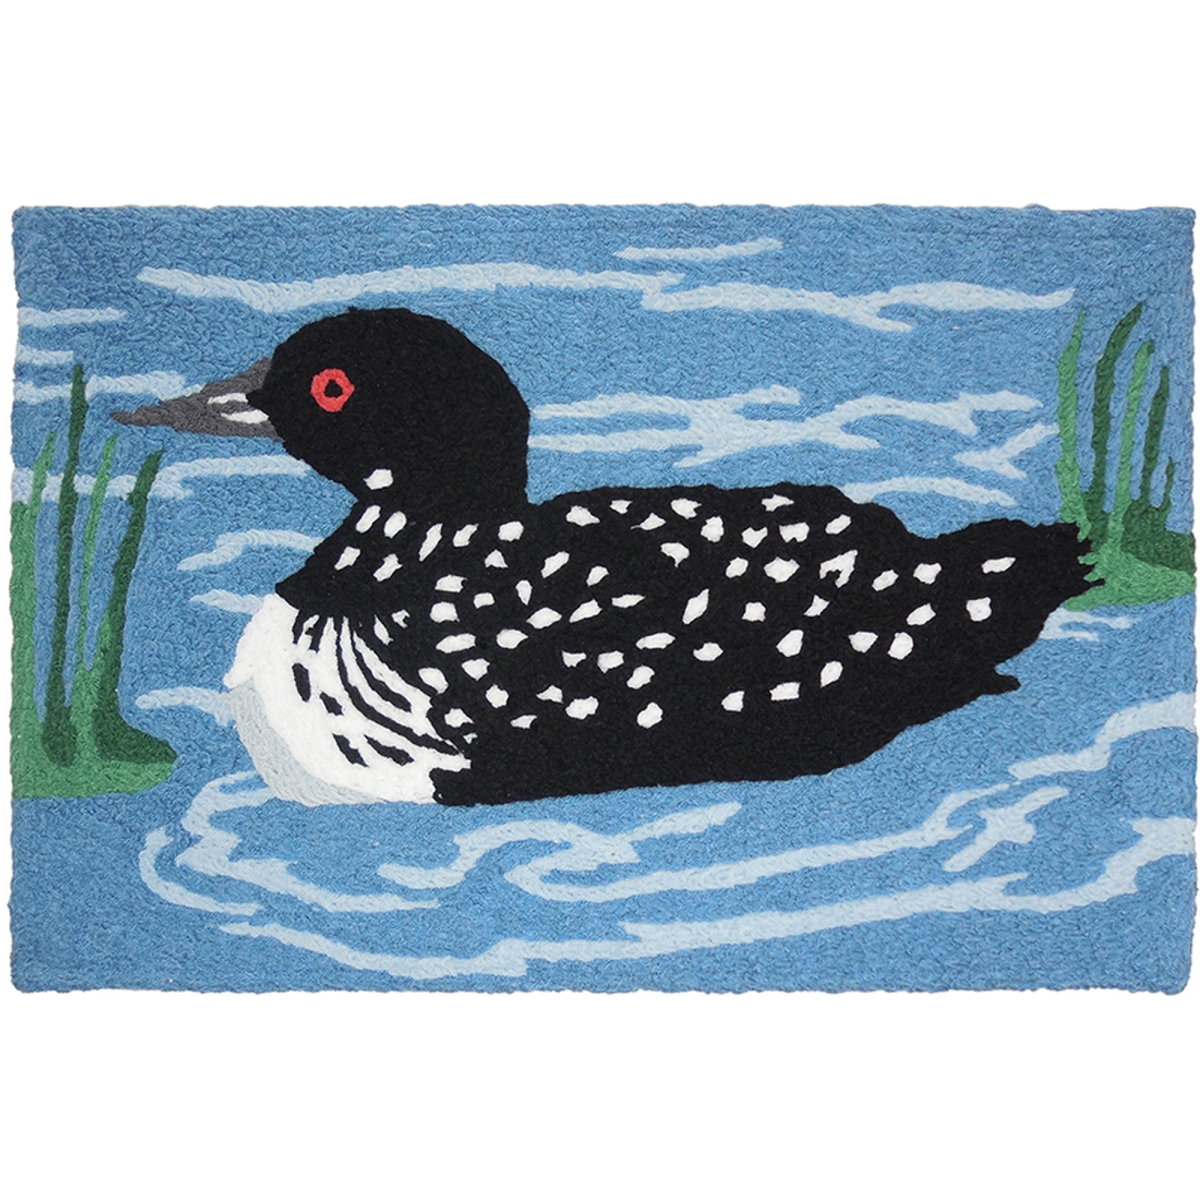 Jb-at011 20 X 30 In. Northwoods Loon Rug